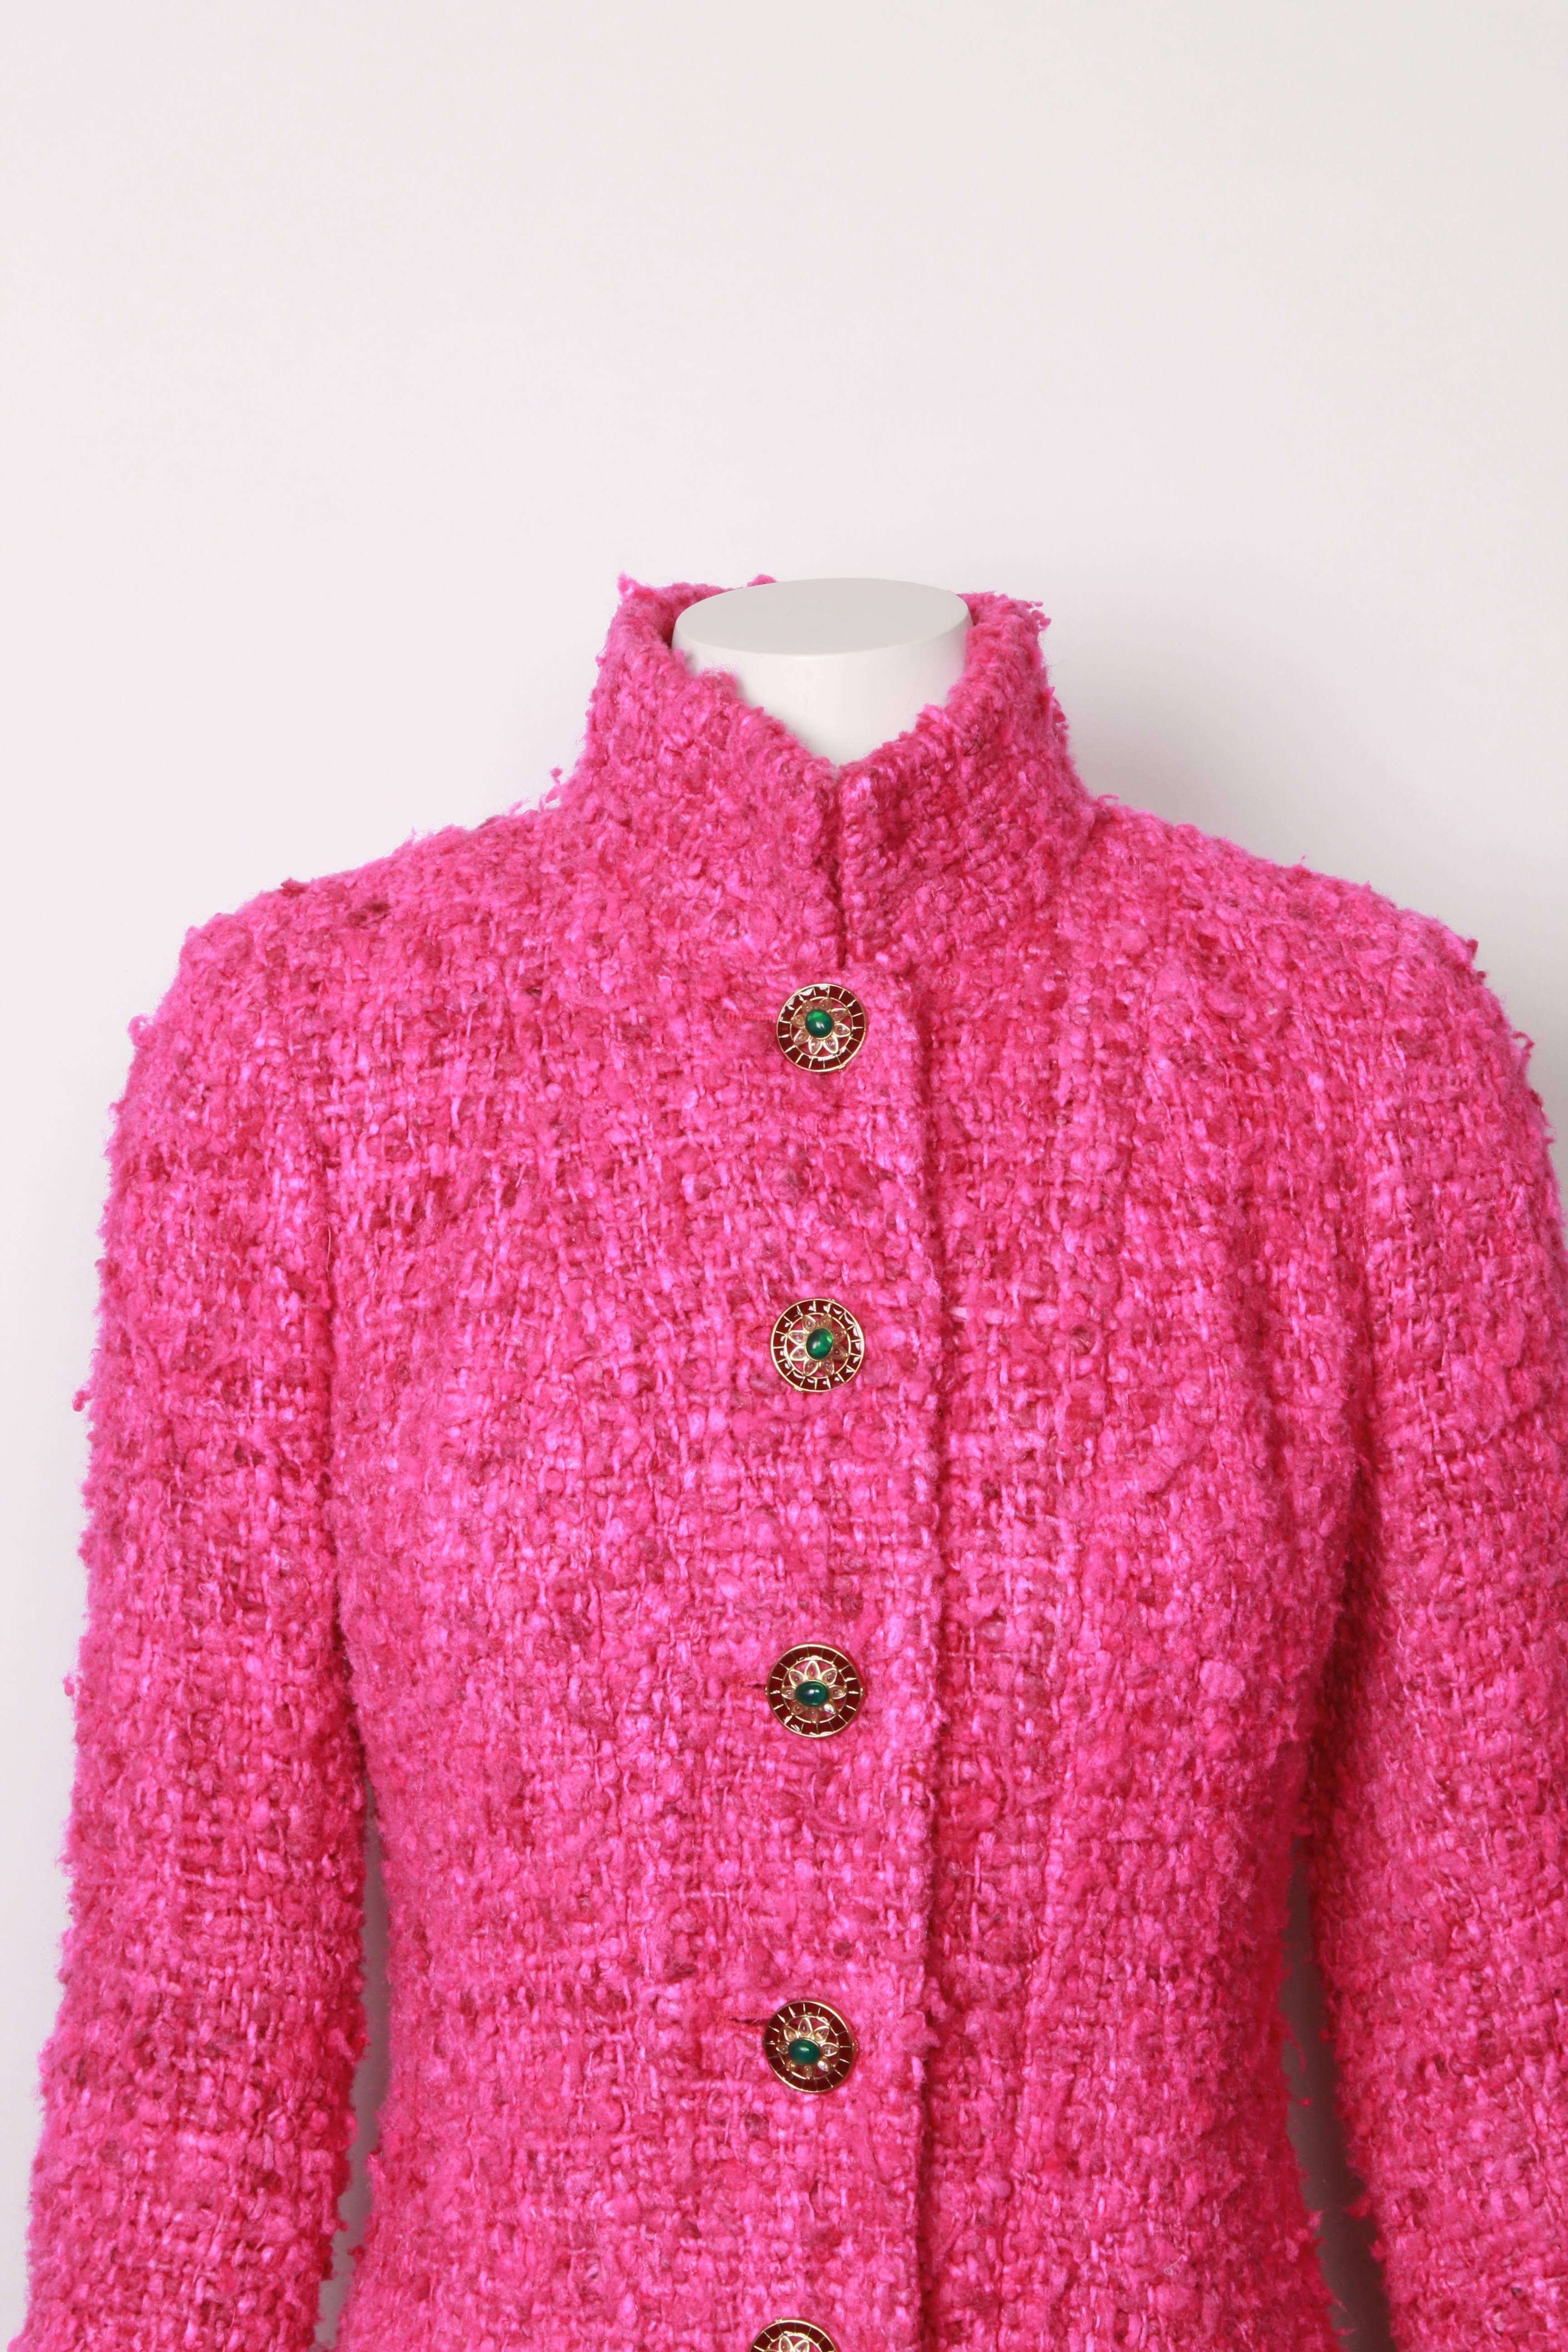 Rare collector's runway jacket in vivid pink boucle' Lesage tweed with jeweled buttons. From the Pre-Fall 2012 Maharaja Collection. Features detachable ivory and gold lurex cuffs.
Fully lined in custom Chanel camellia silk and golden chain detail